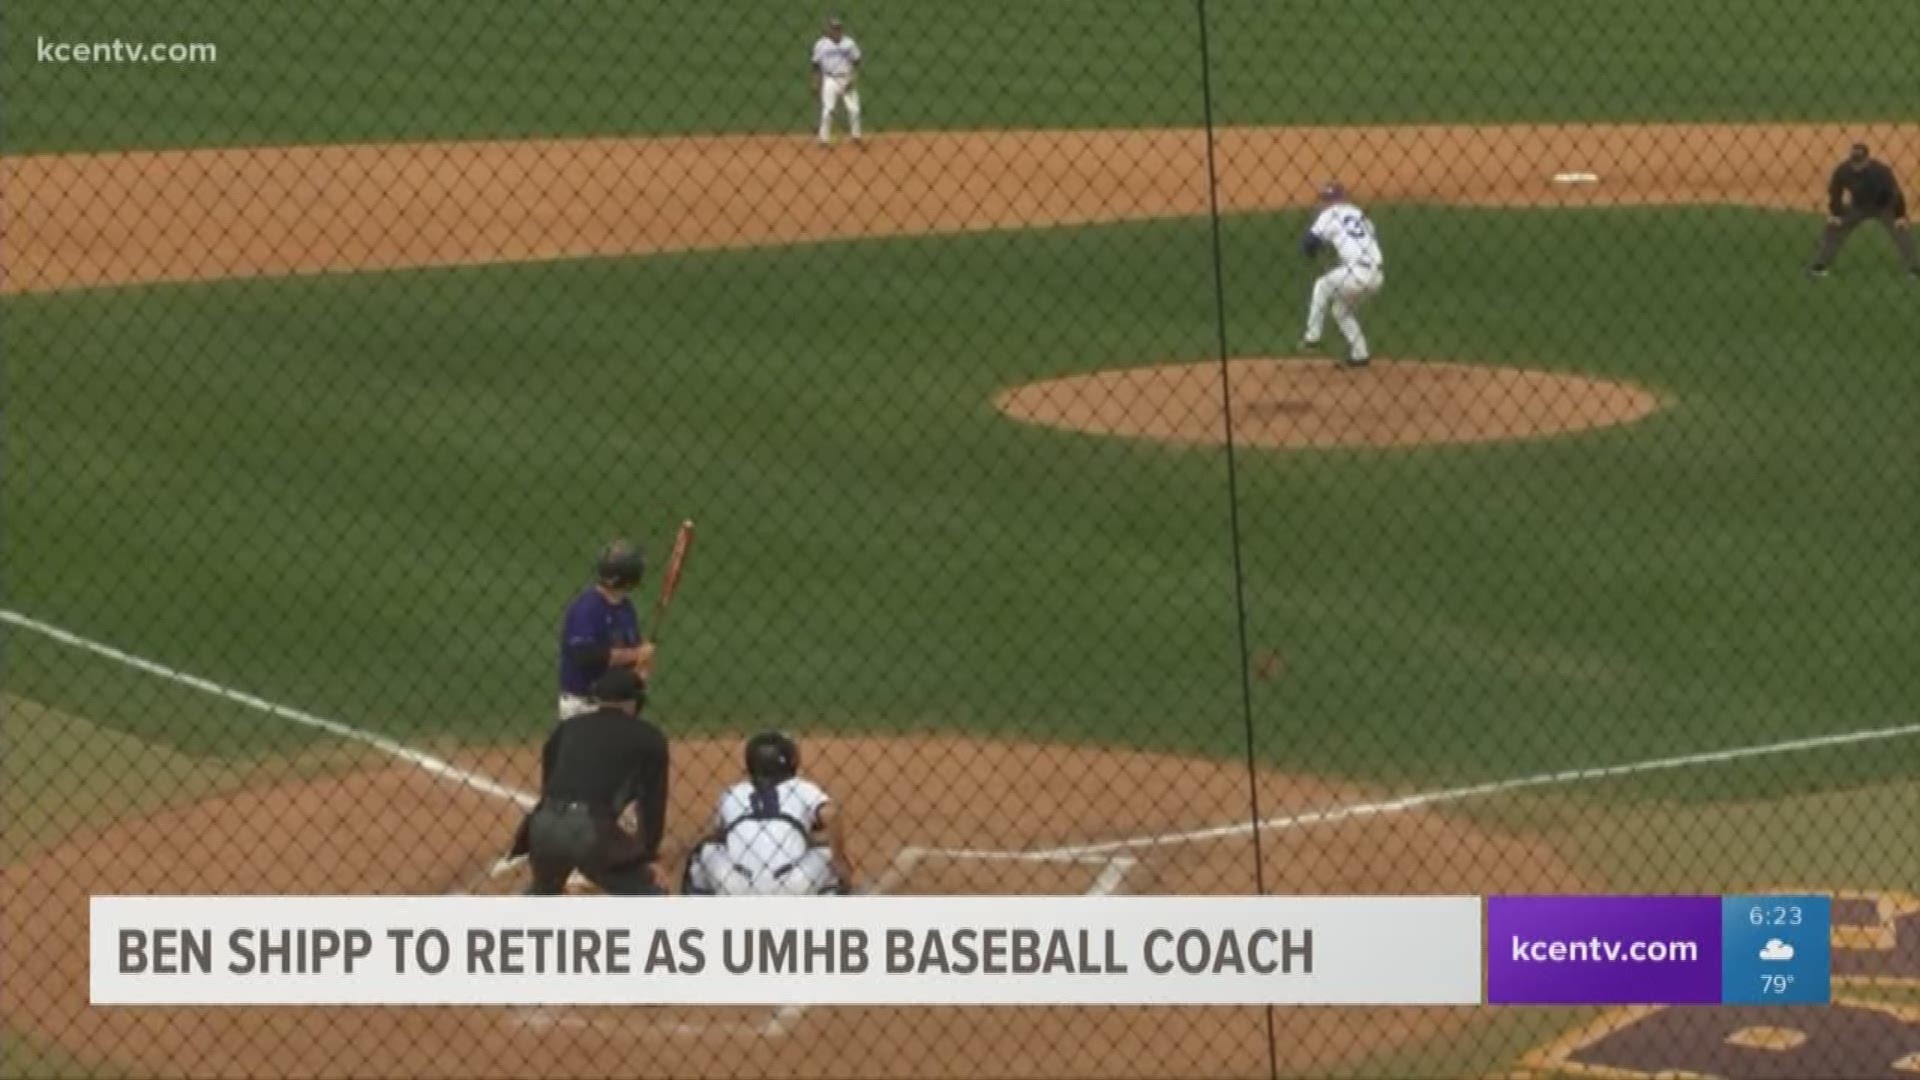 After 34 years of coaching baseball and serving as the Cru's athletic director, Ben Shipp will retire in early 2020.